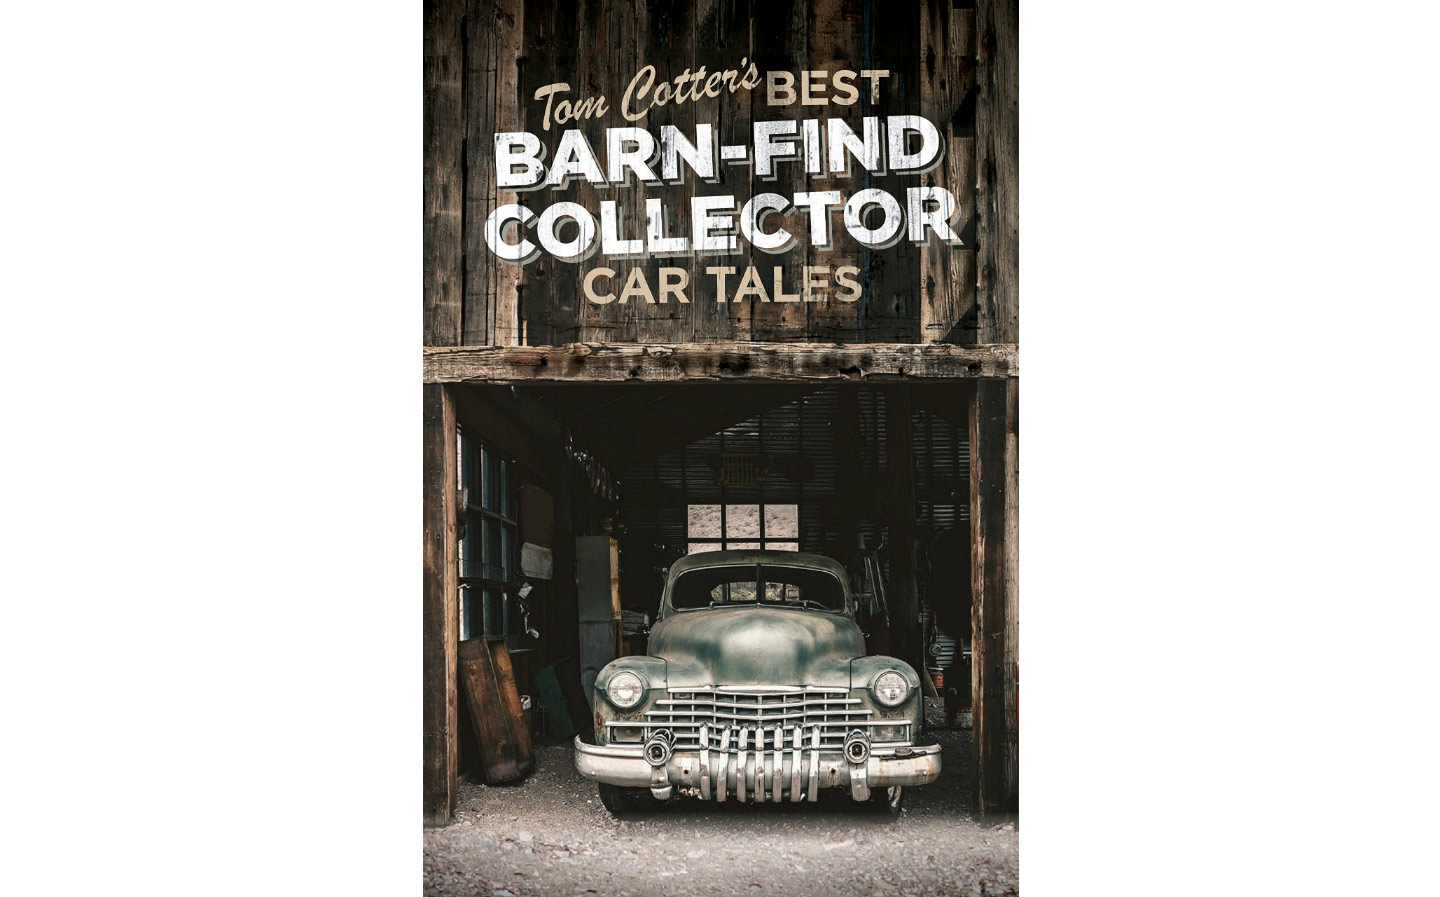 Christmas gift ideas for car fan: Tom Cotter's best barn-find collector car tales